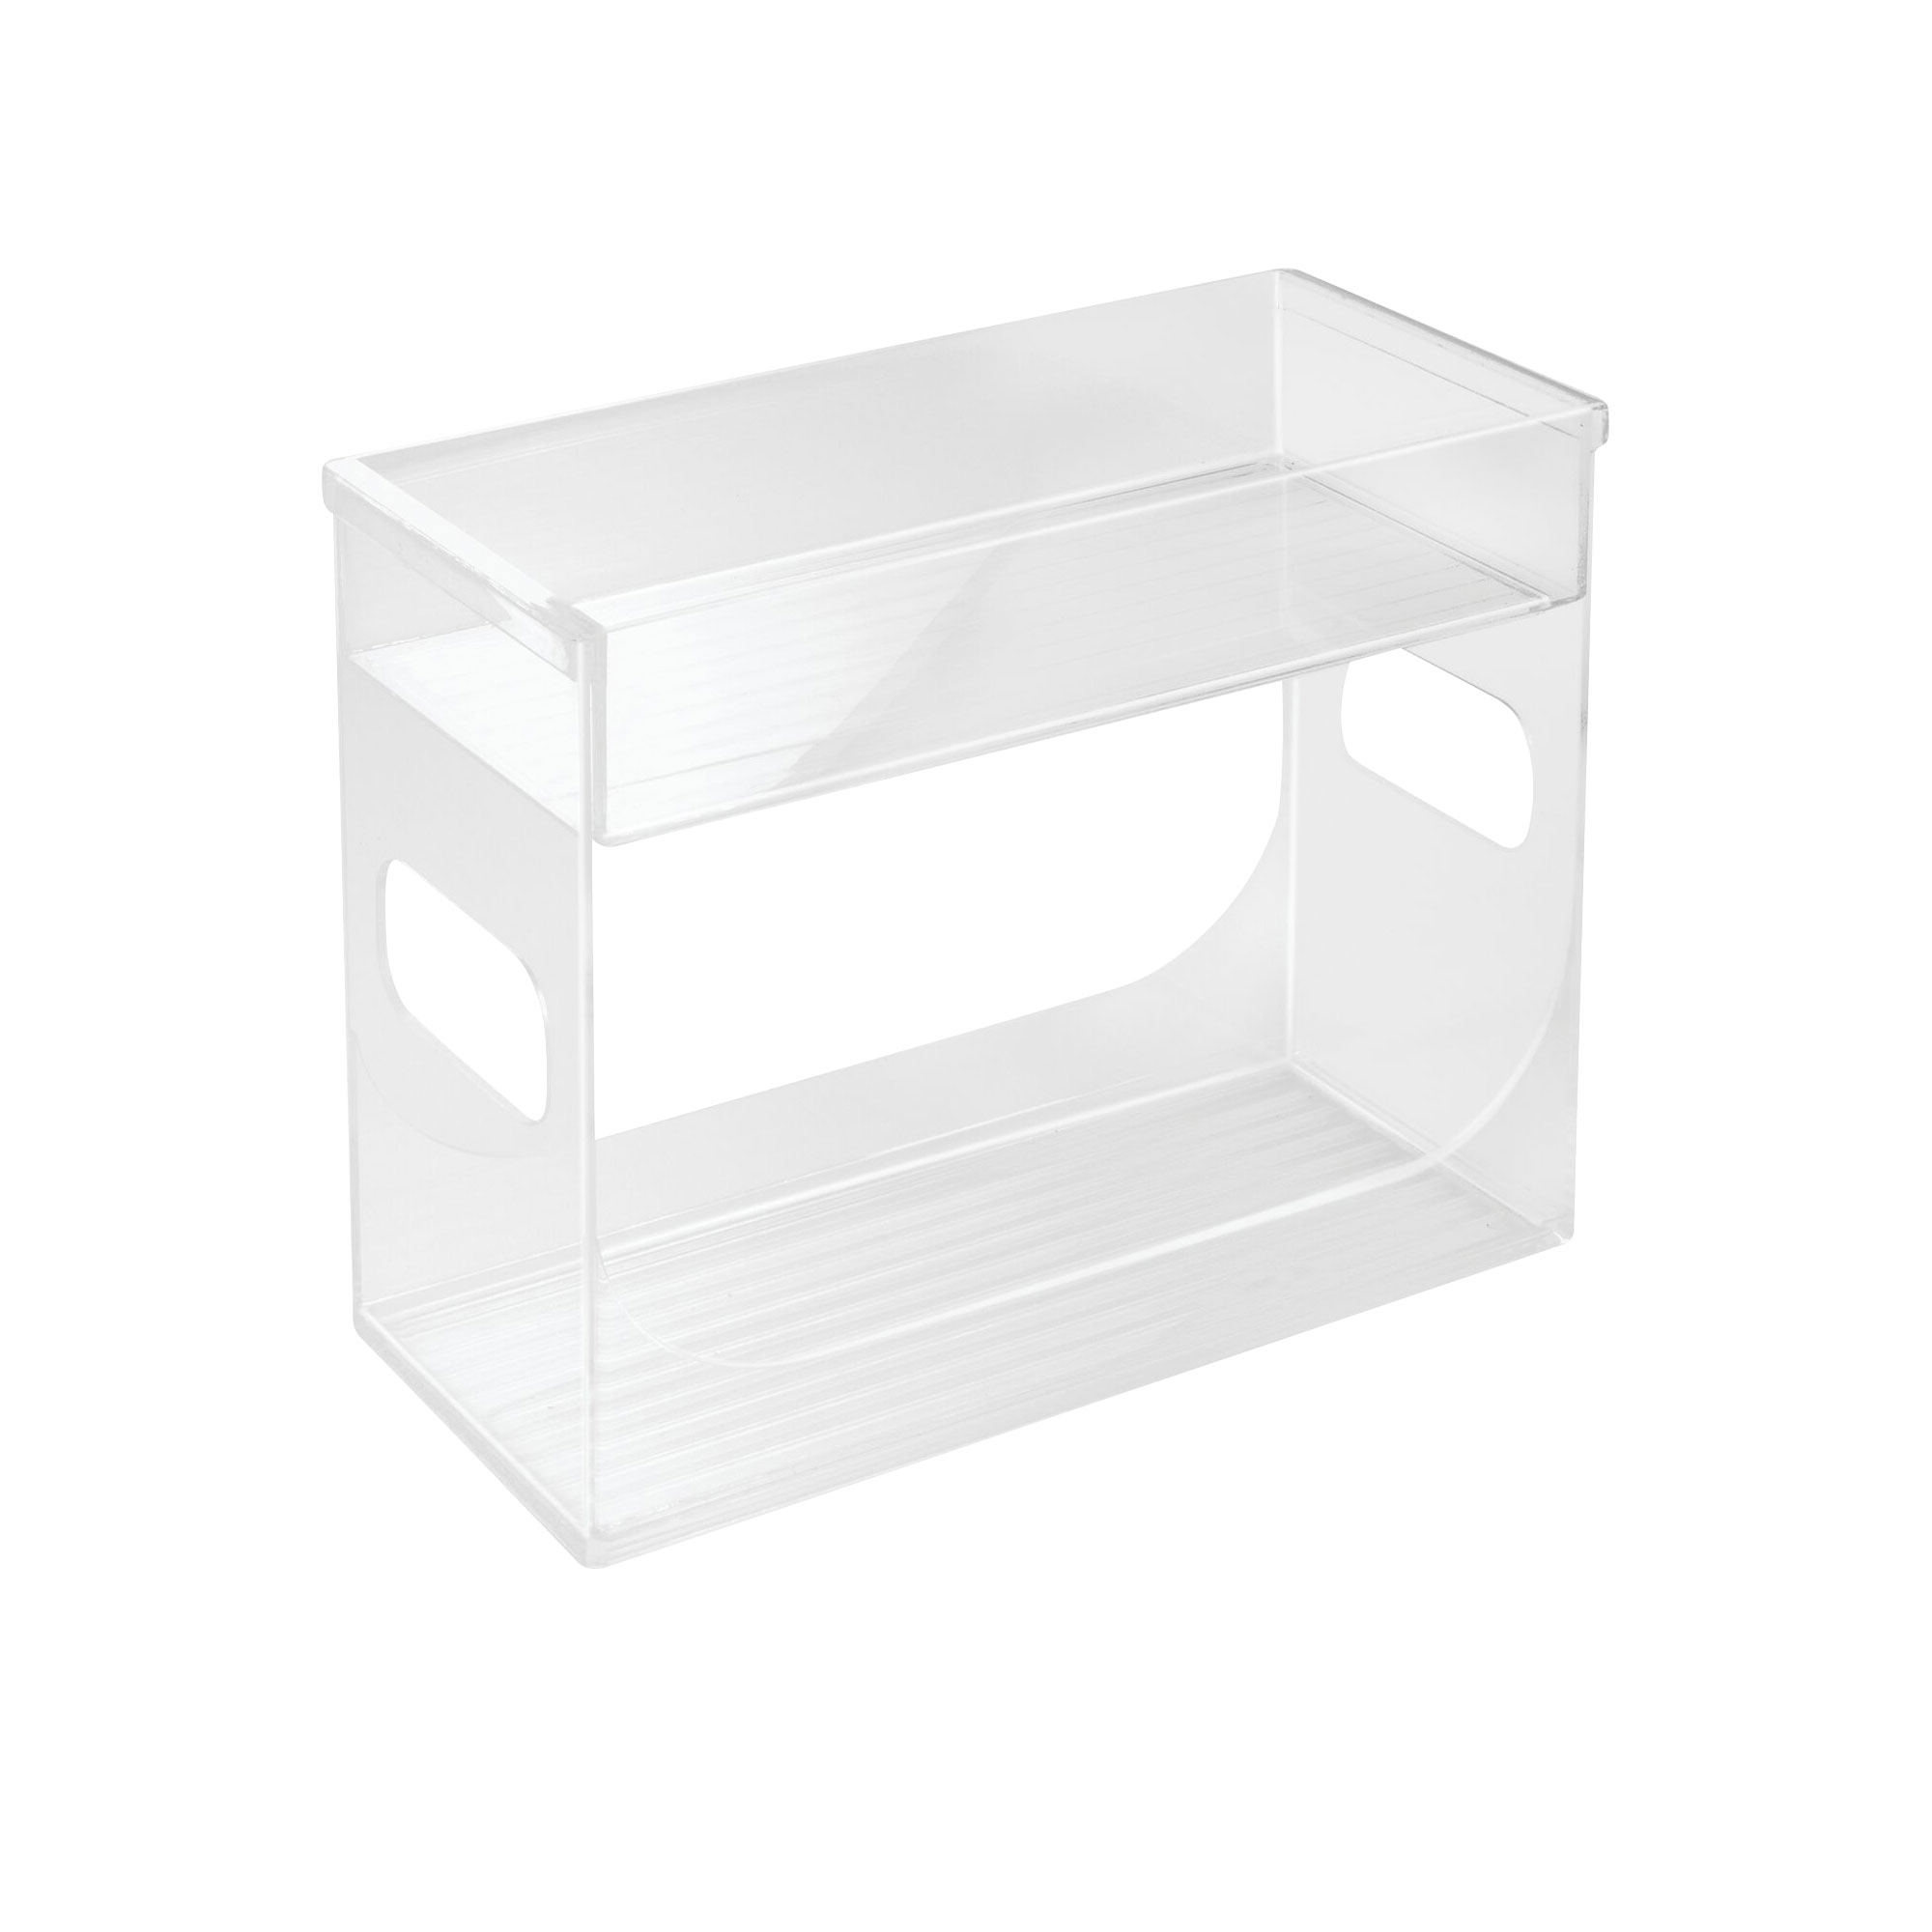 iDesign Linus 2 Tier Spice Rack Clear Image 1